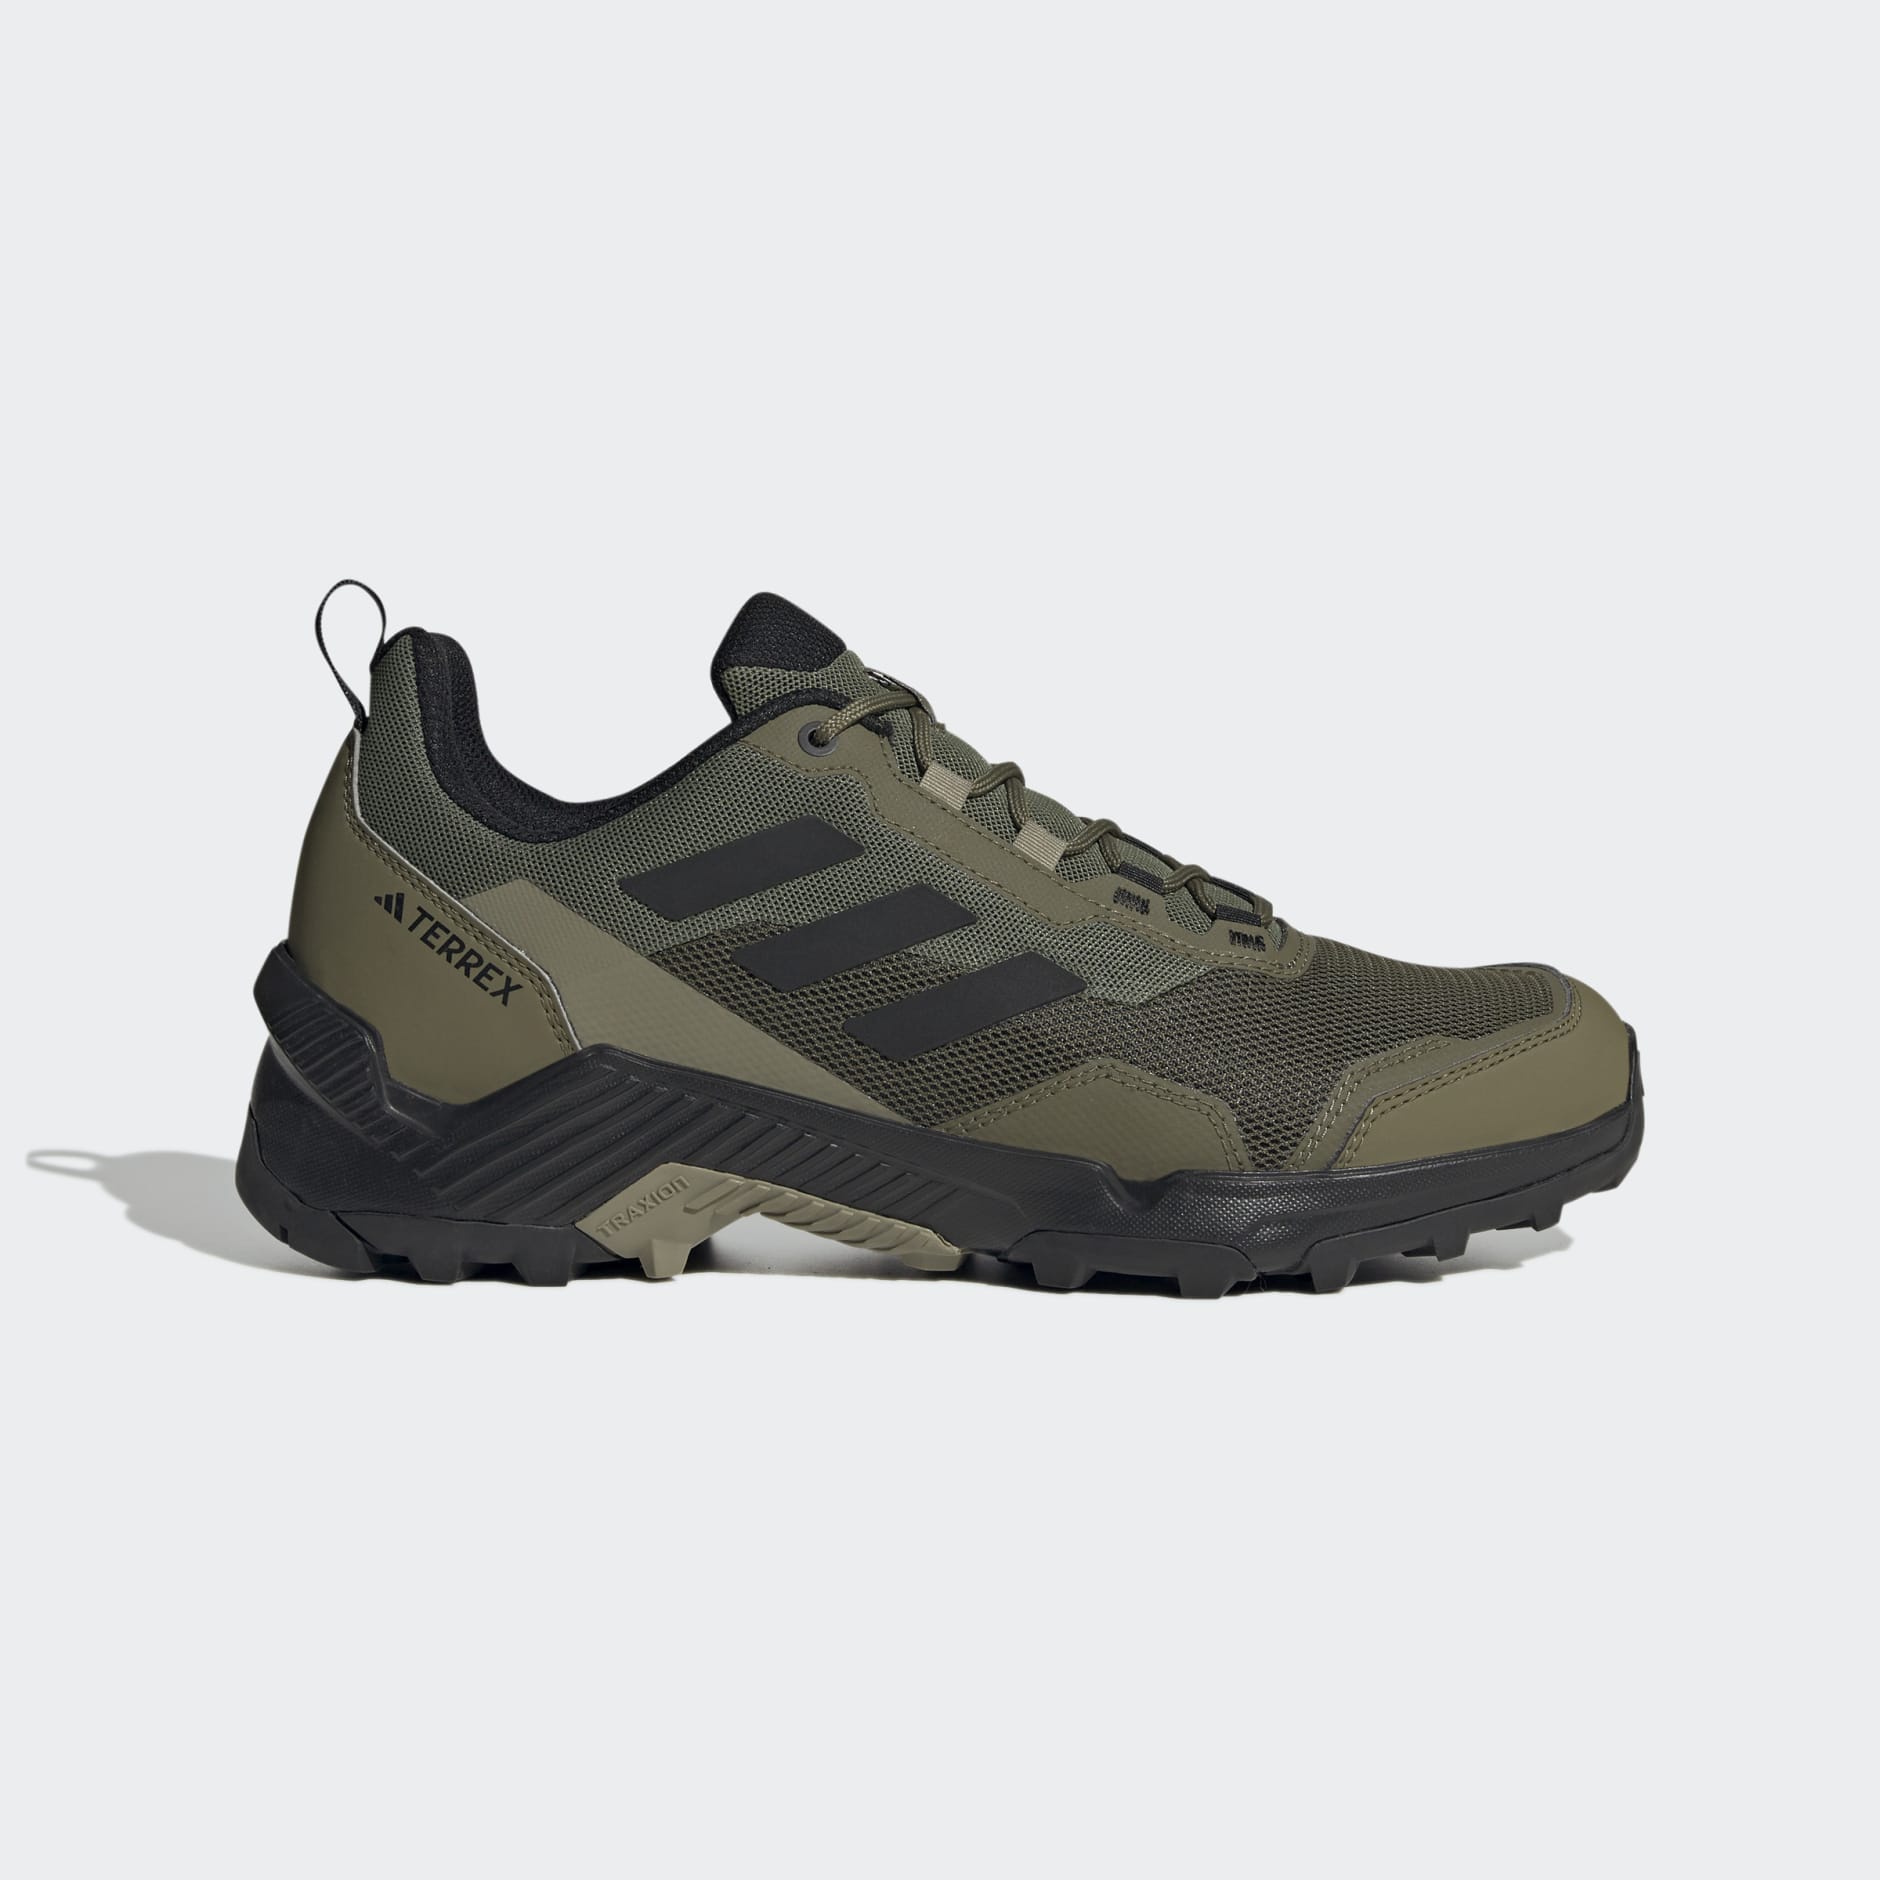 Men's Shoes - Eastrail 2.0 Hiking Shoes - Green | adidas Egypt